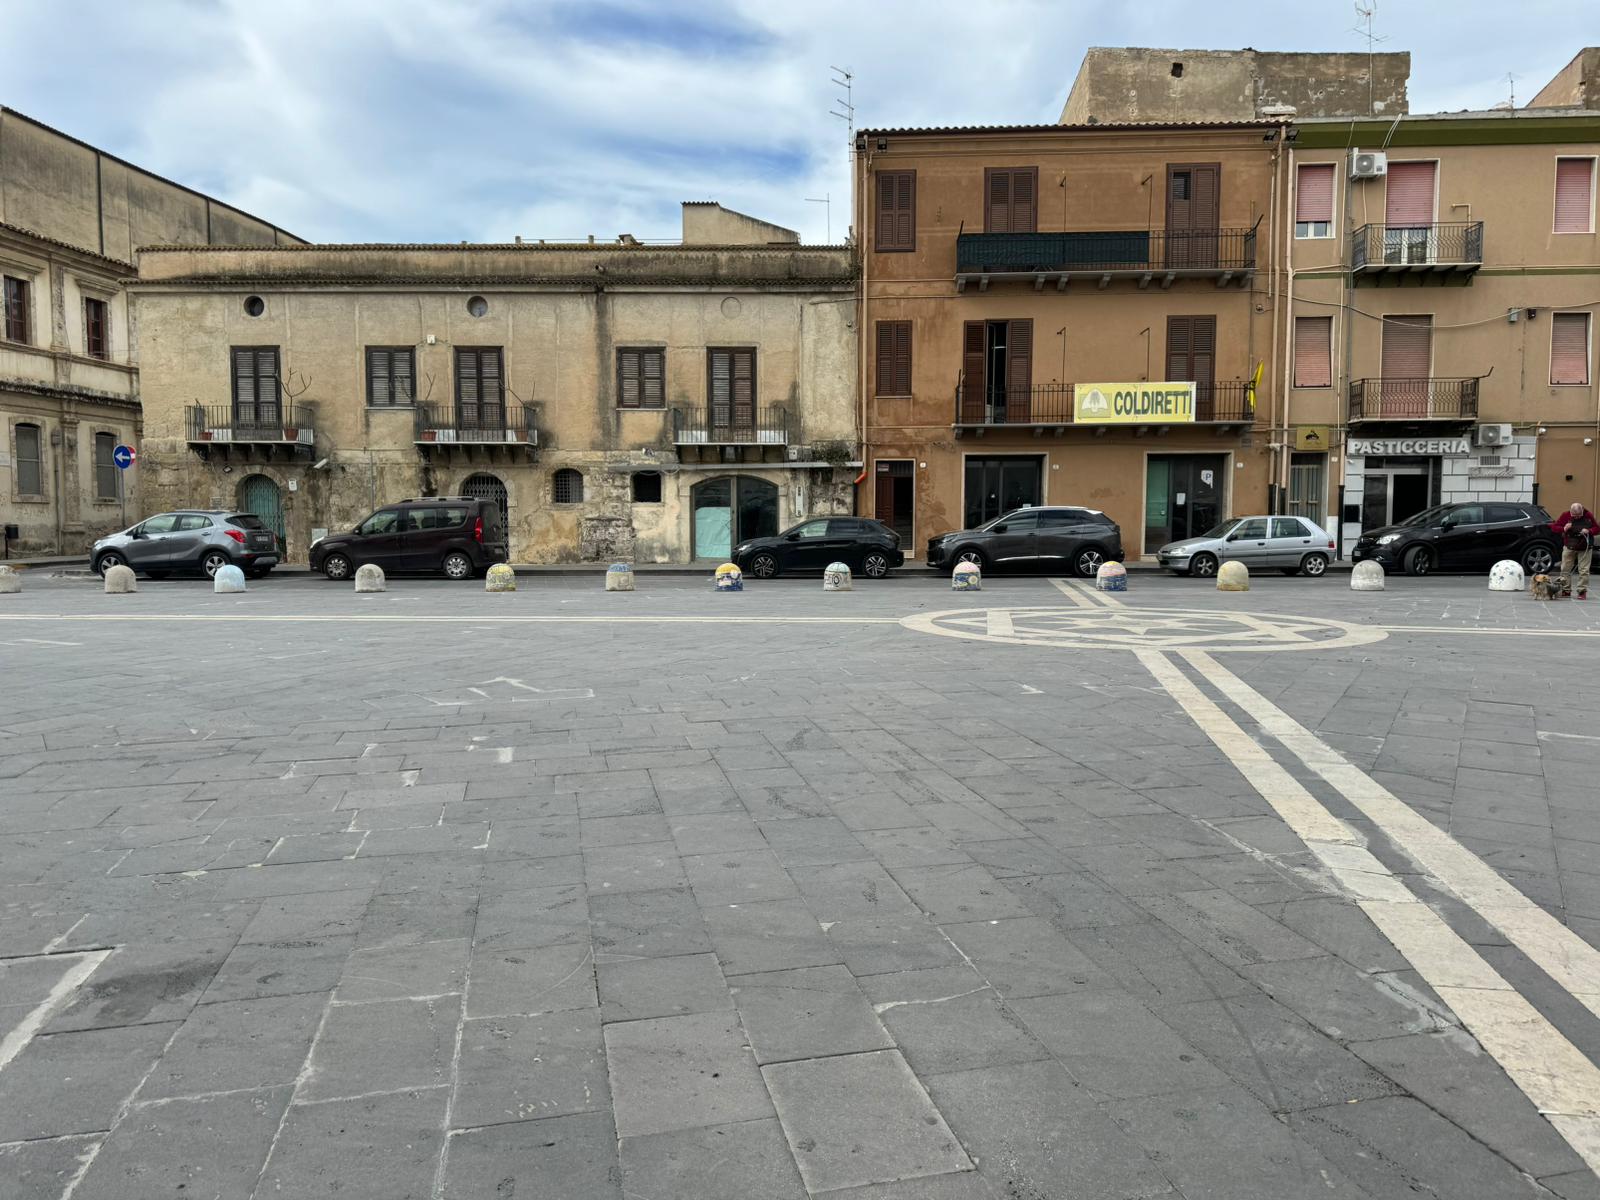 Piazza Sant'Angelo